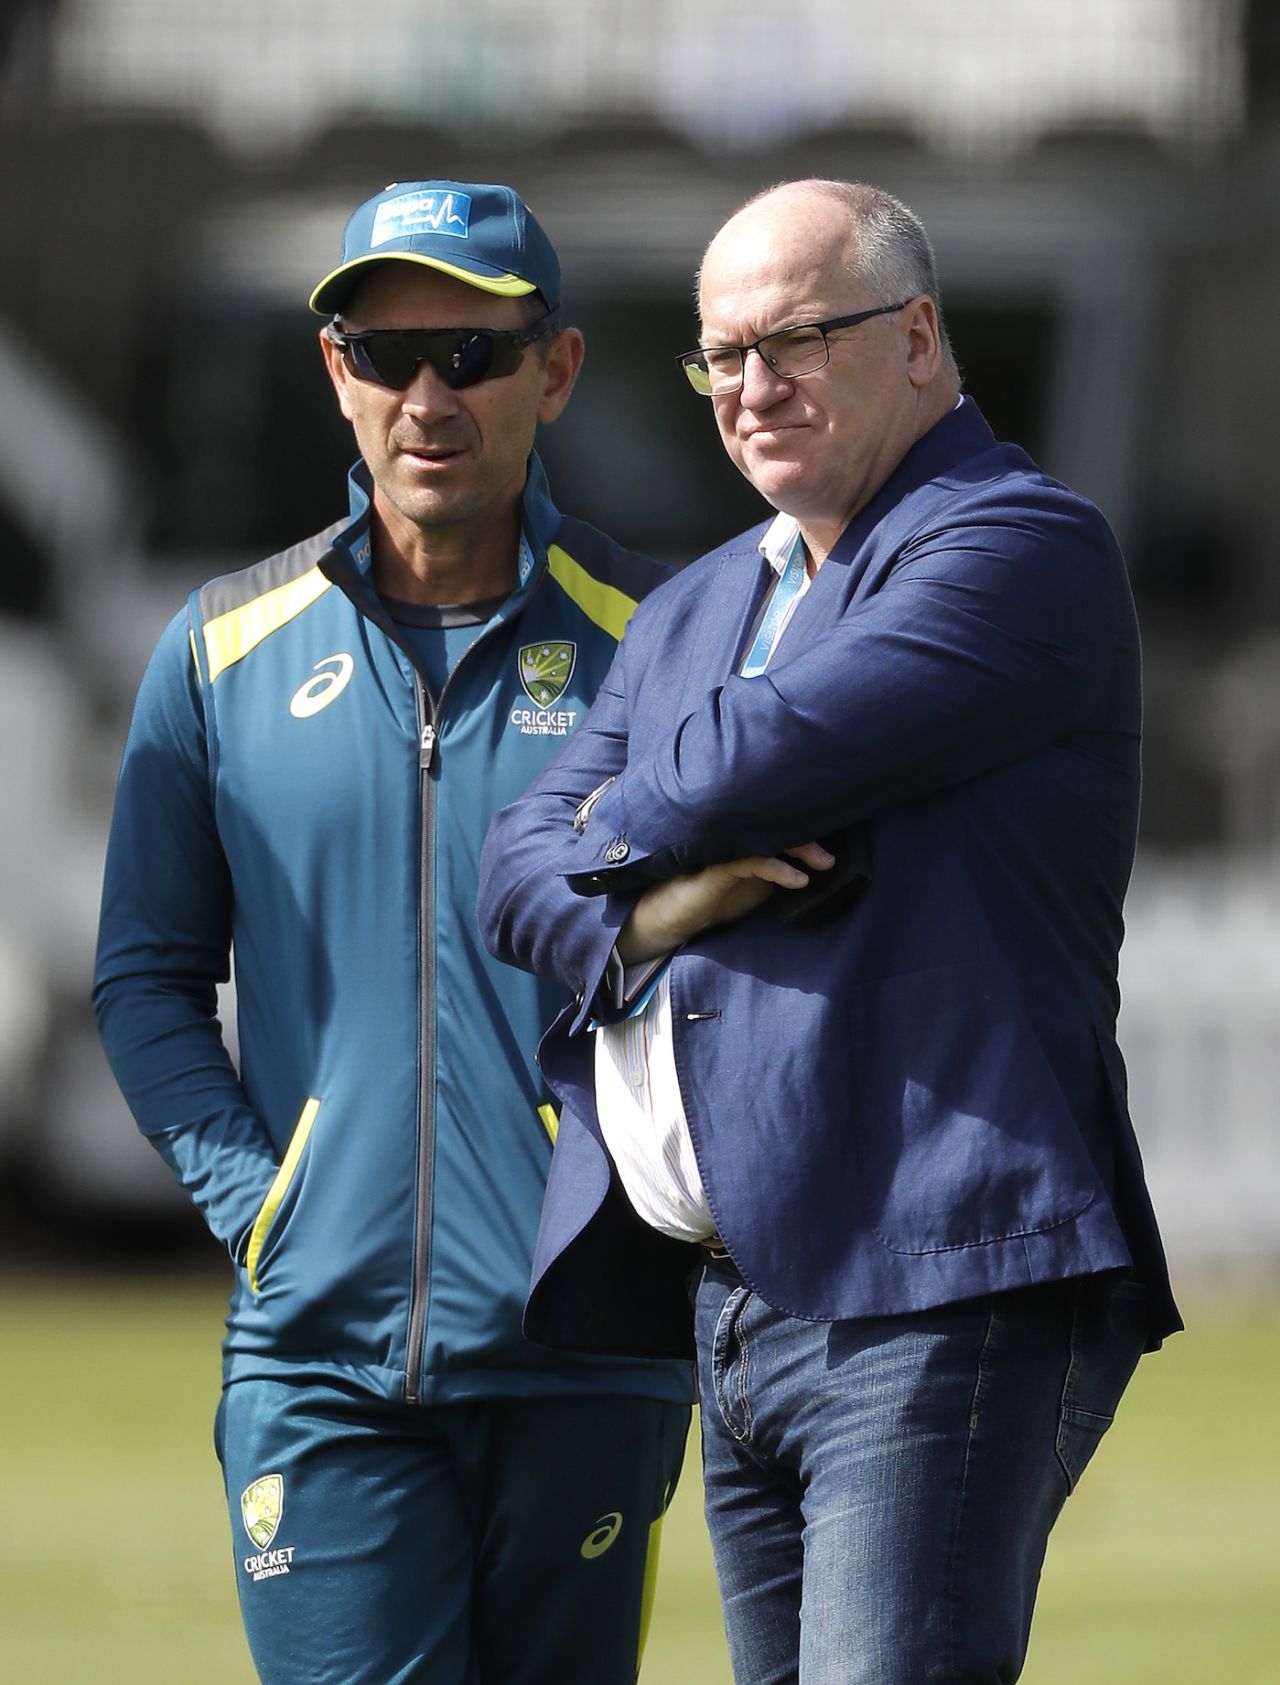 Justin Langer speaks with Cricket Australia Chairman Earl Eddings during a nets session before the second Ashes Test, Lord's, August 12, 2019